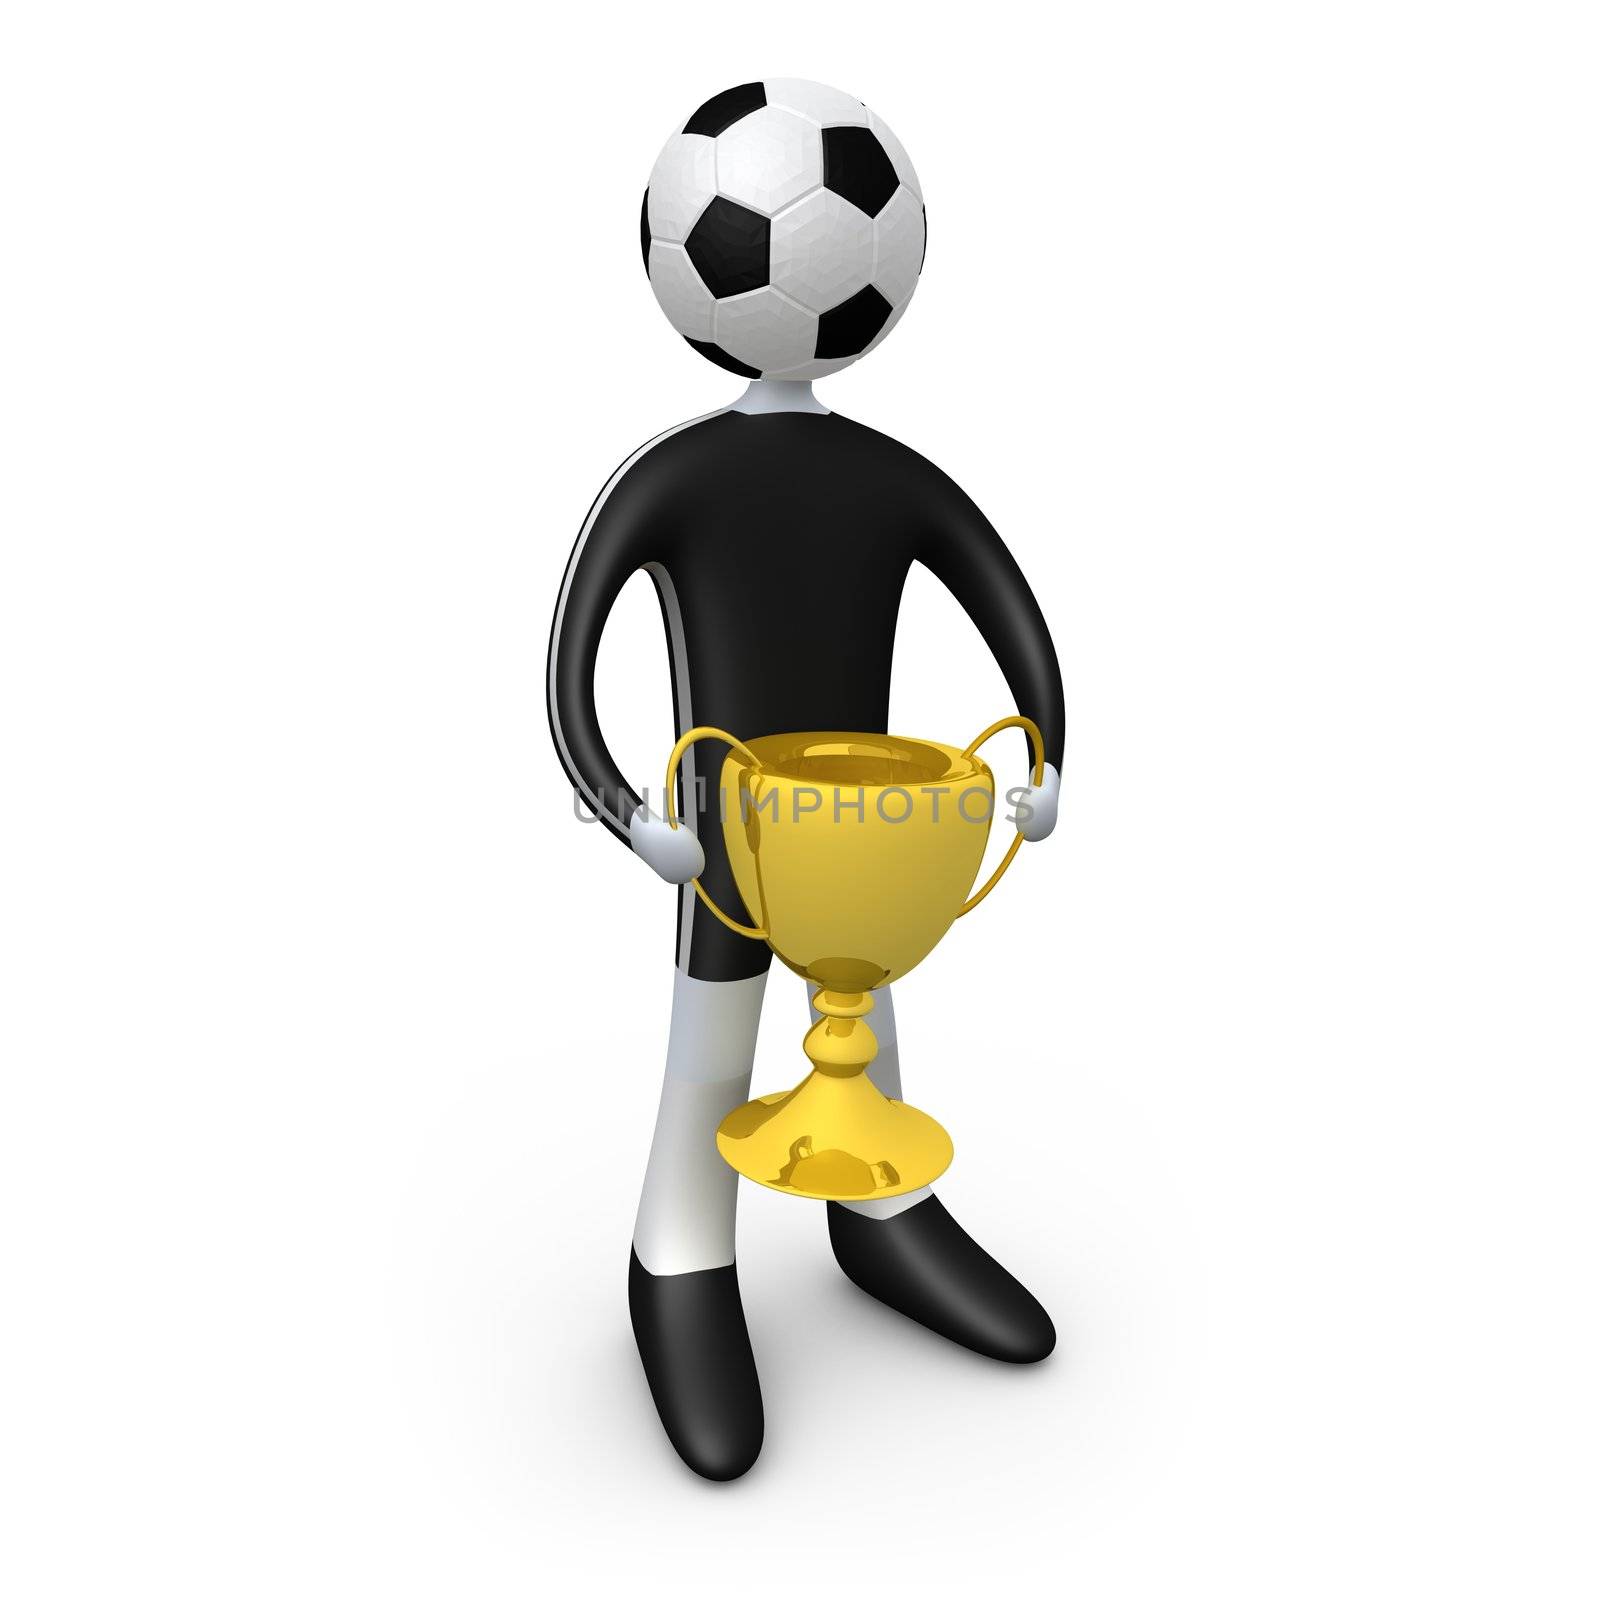 Computer generated image - Football player holding the cup.